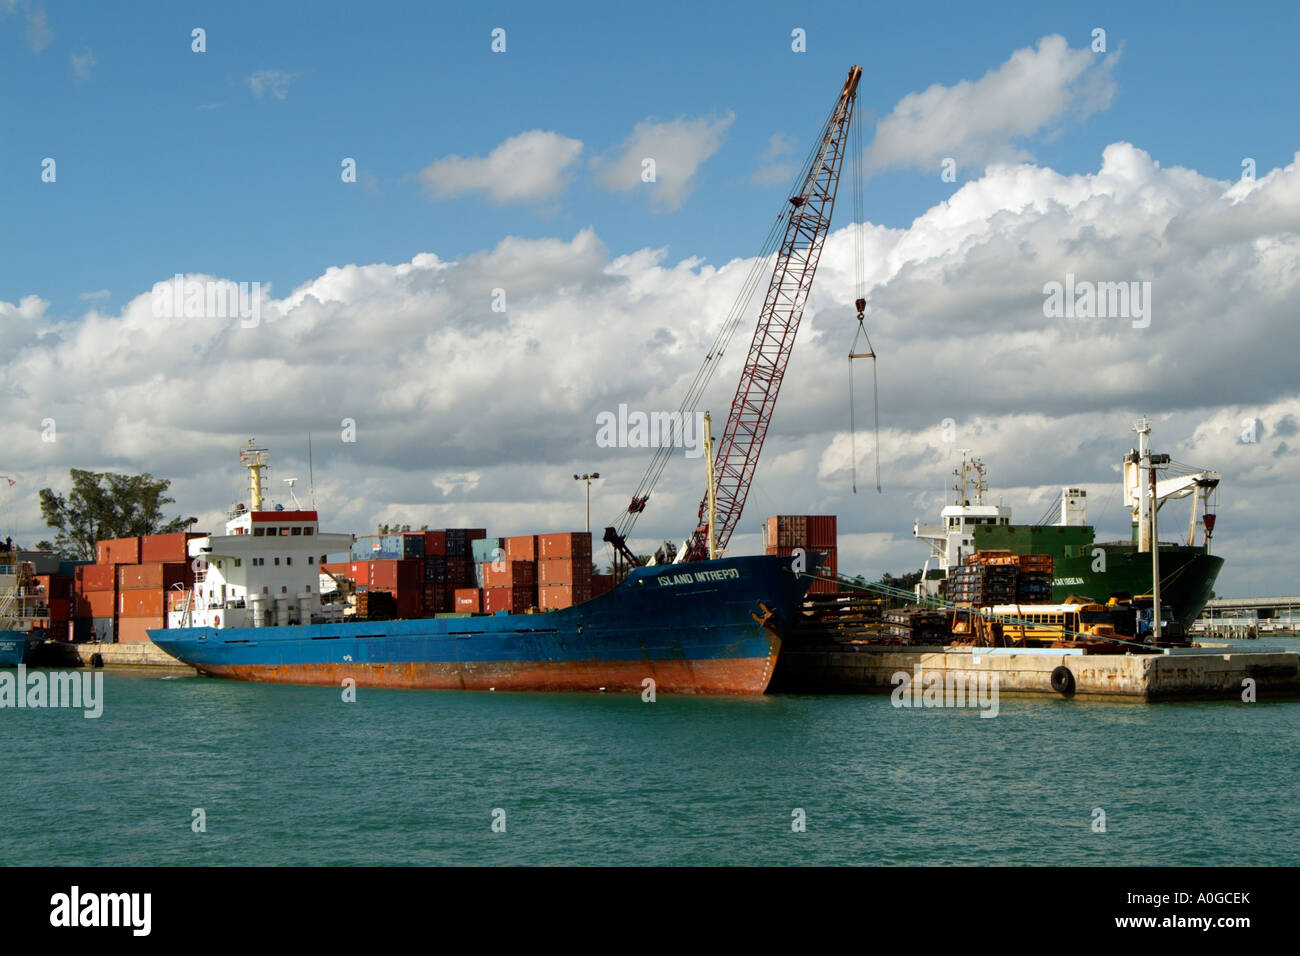 Container ship The Island Intrepid which sails under the flag of Saint Vincent and The Grenadines loading in the Port of Miami Stock Photo